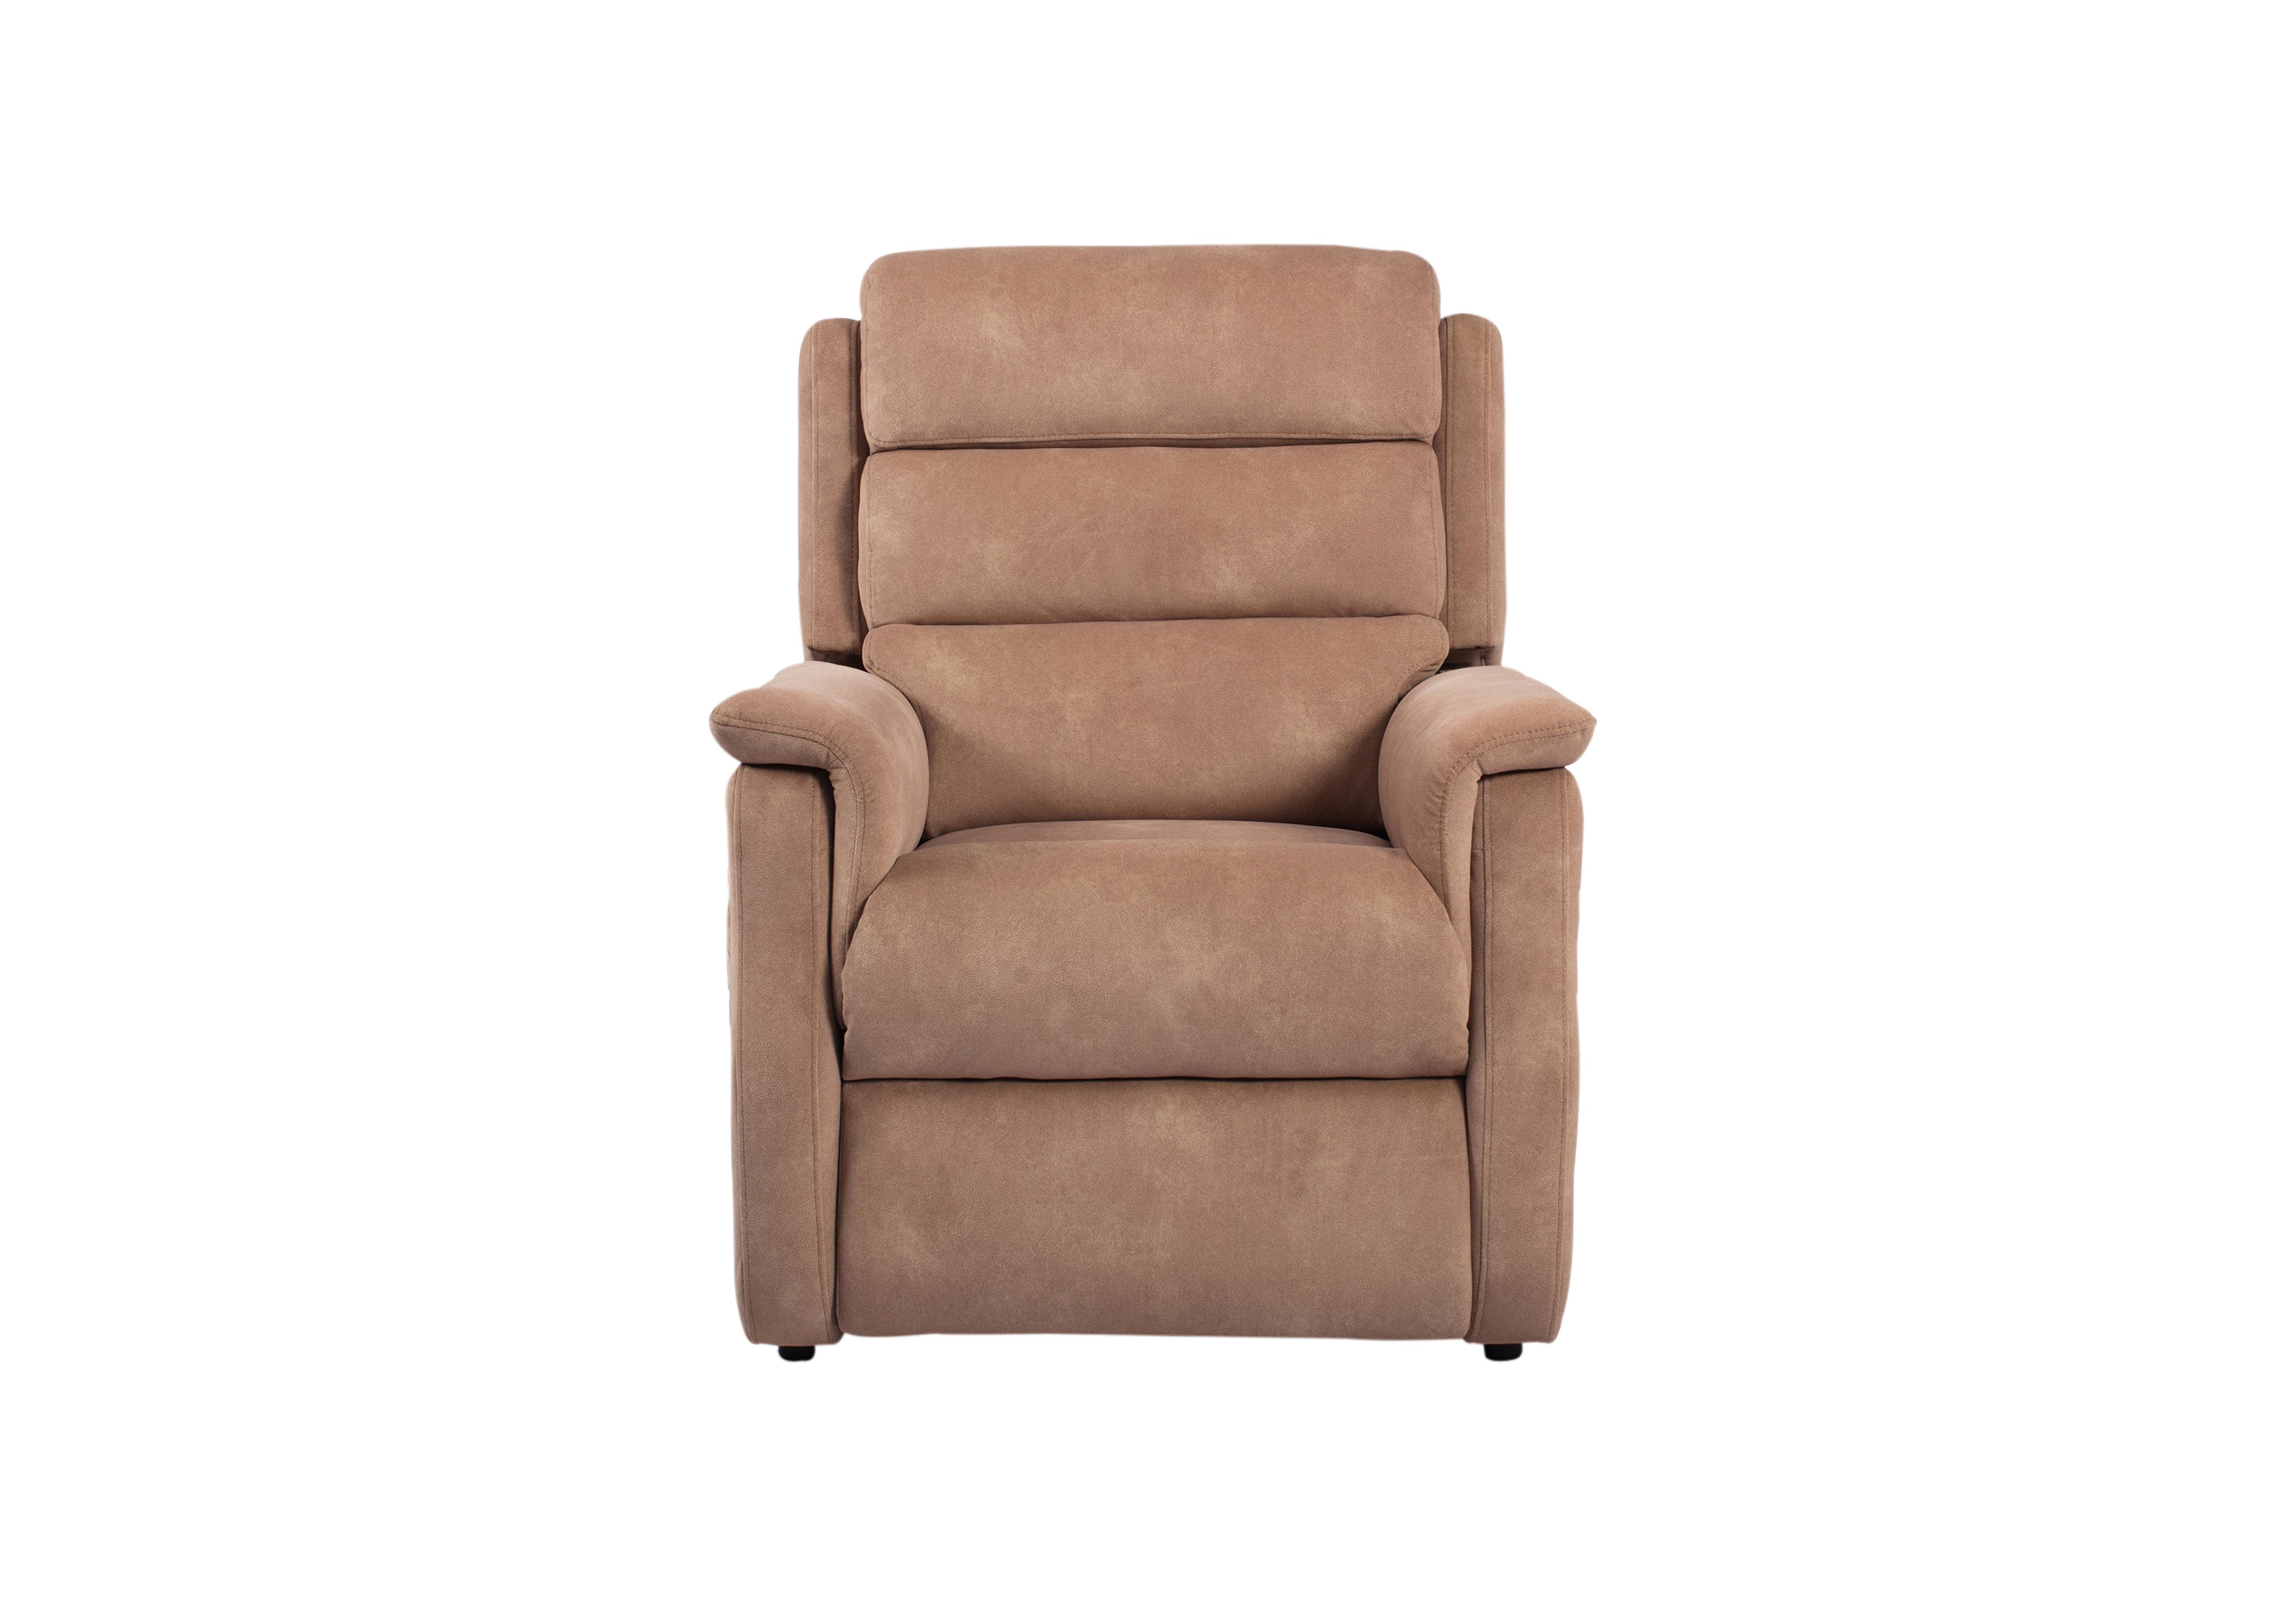 My Chair McCoy Fabric Lift and Rise Chair in 43507 Sand Dexter 07 on Furniture Village